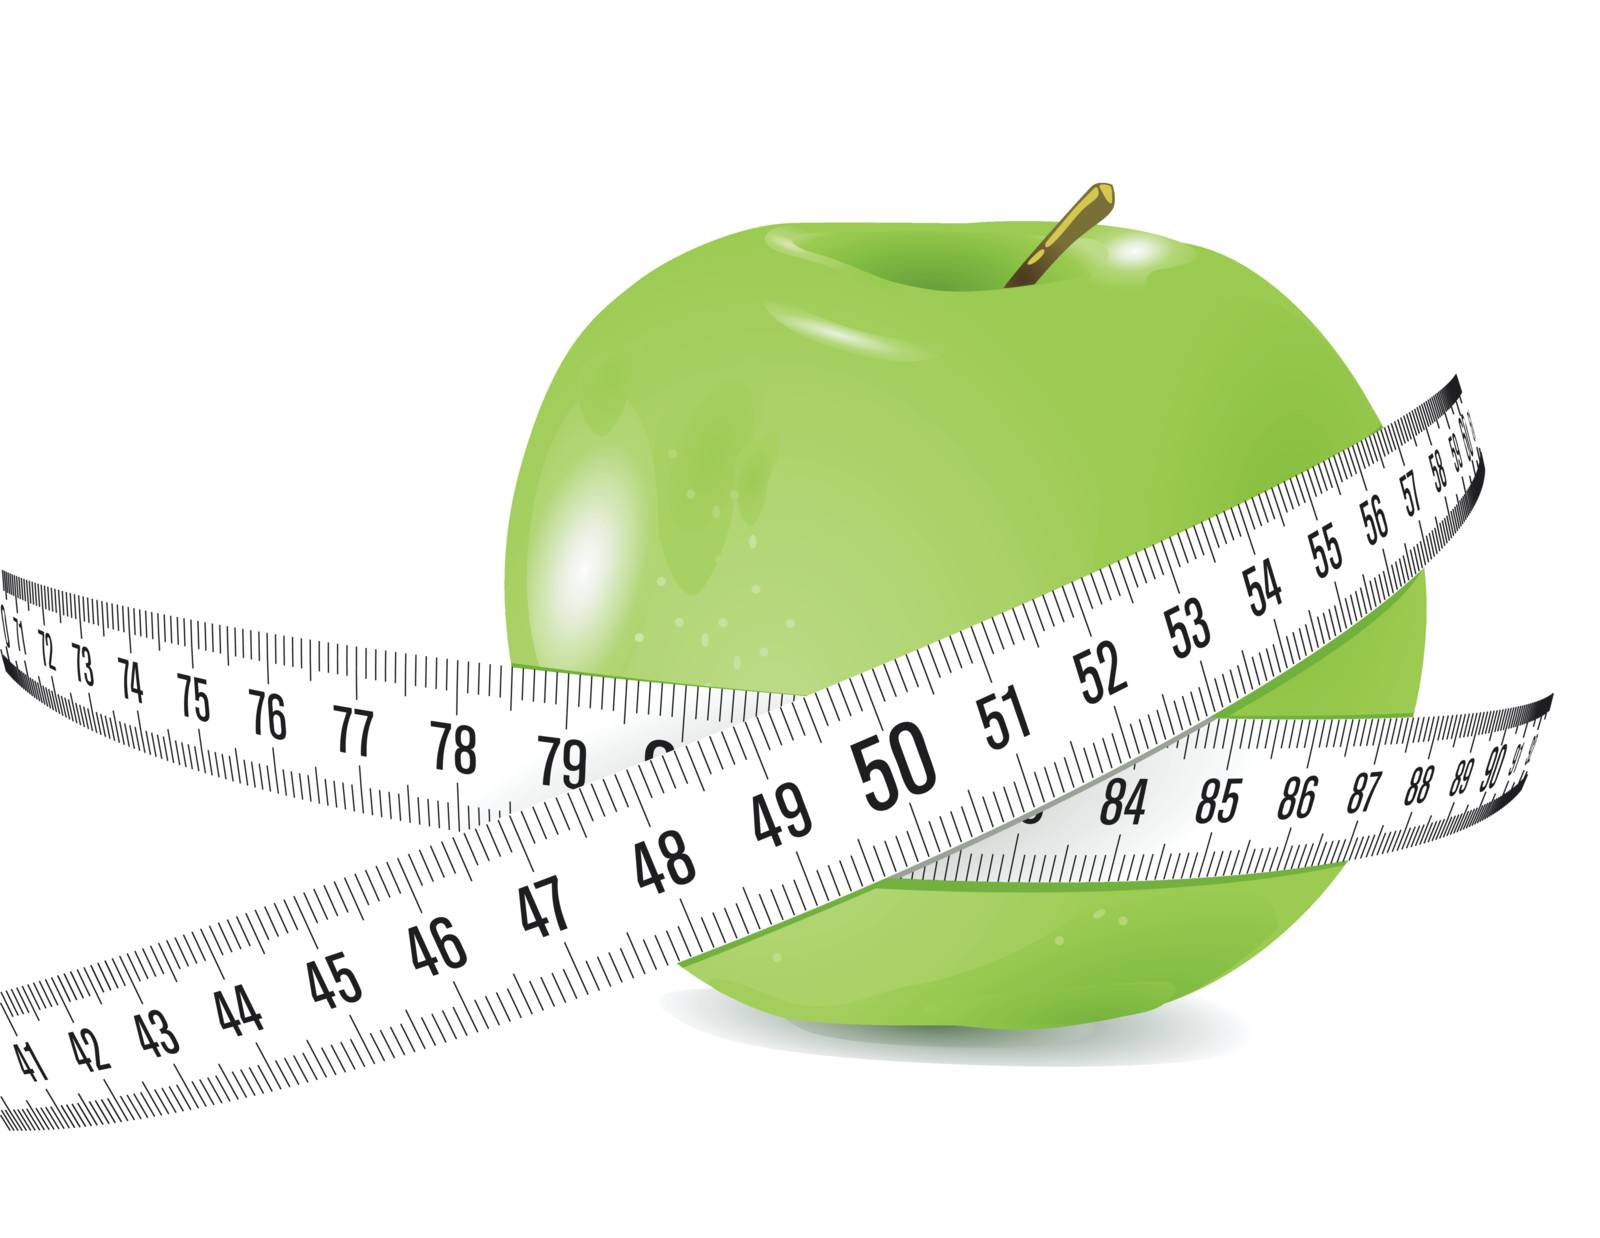 fresh apple with measuring tape